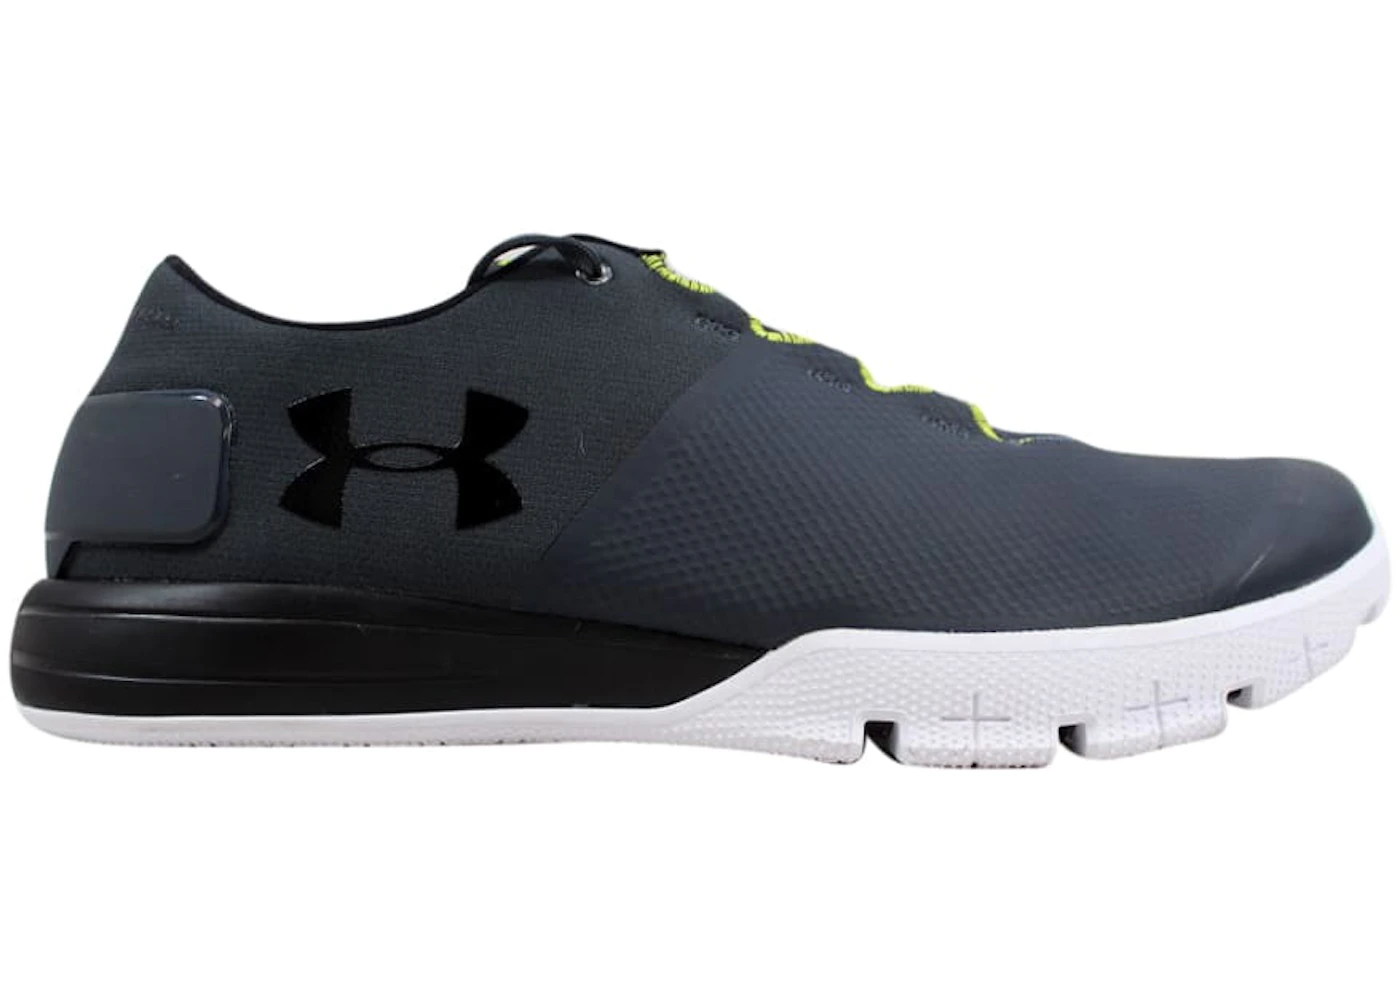 Under Armour Charged Ultimate TR 2.0 Stealth Grey Men's - 1285648-008 - US